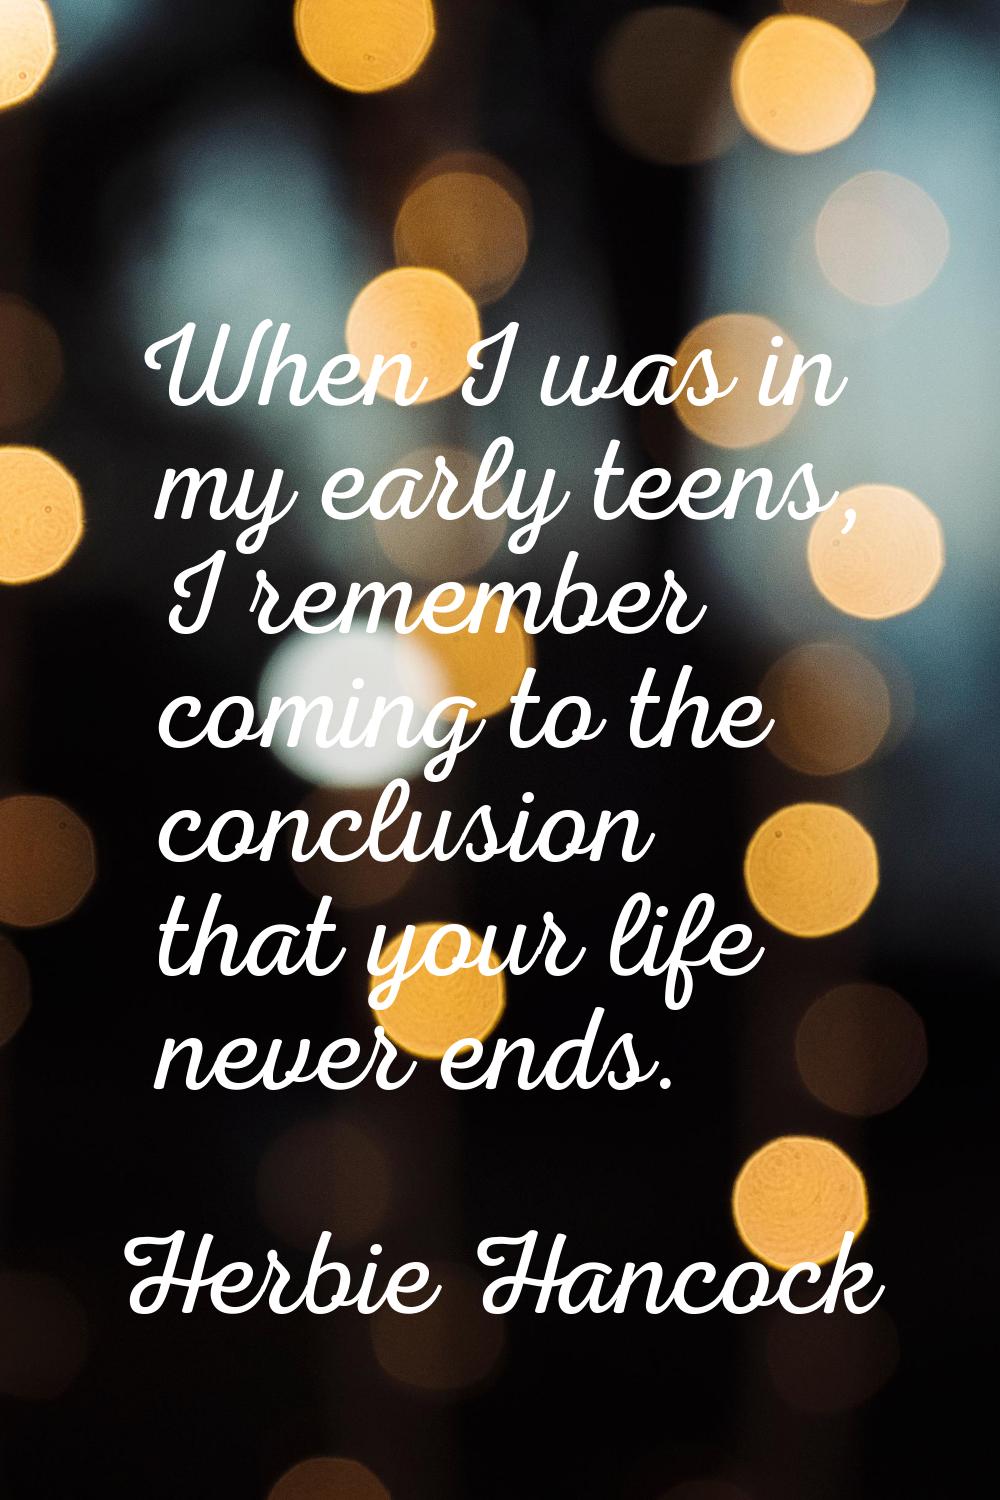 When I was in my early teens, I remember coming to the conclusion that your life never ends.